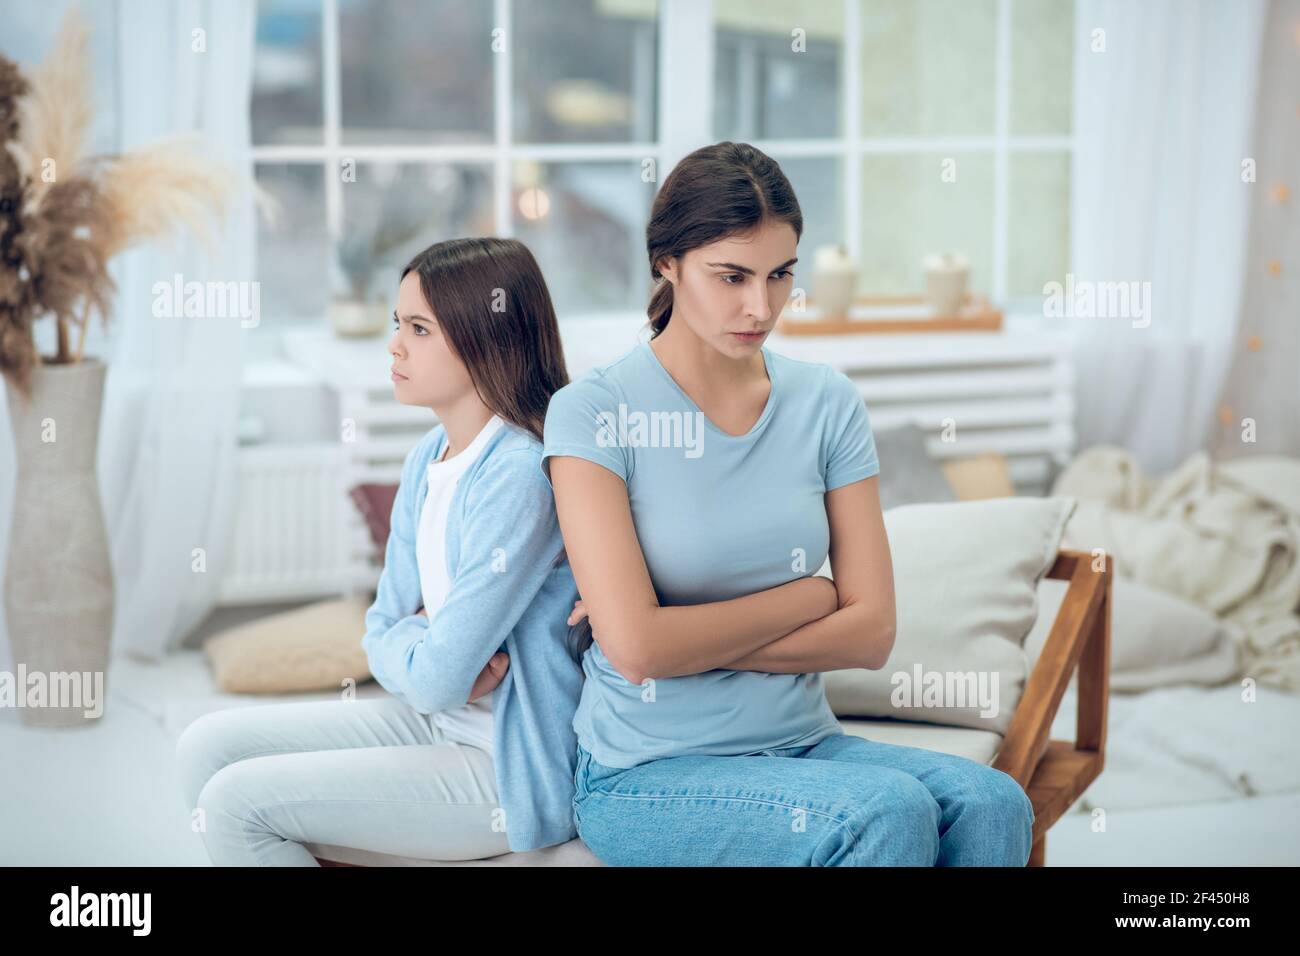 Mom and daughter sitting turned away from each other Stock Photo